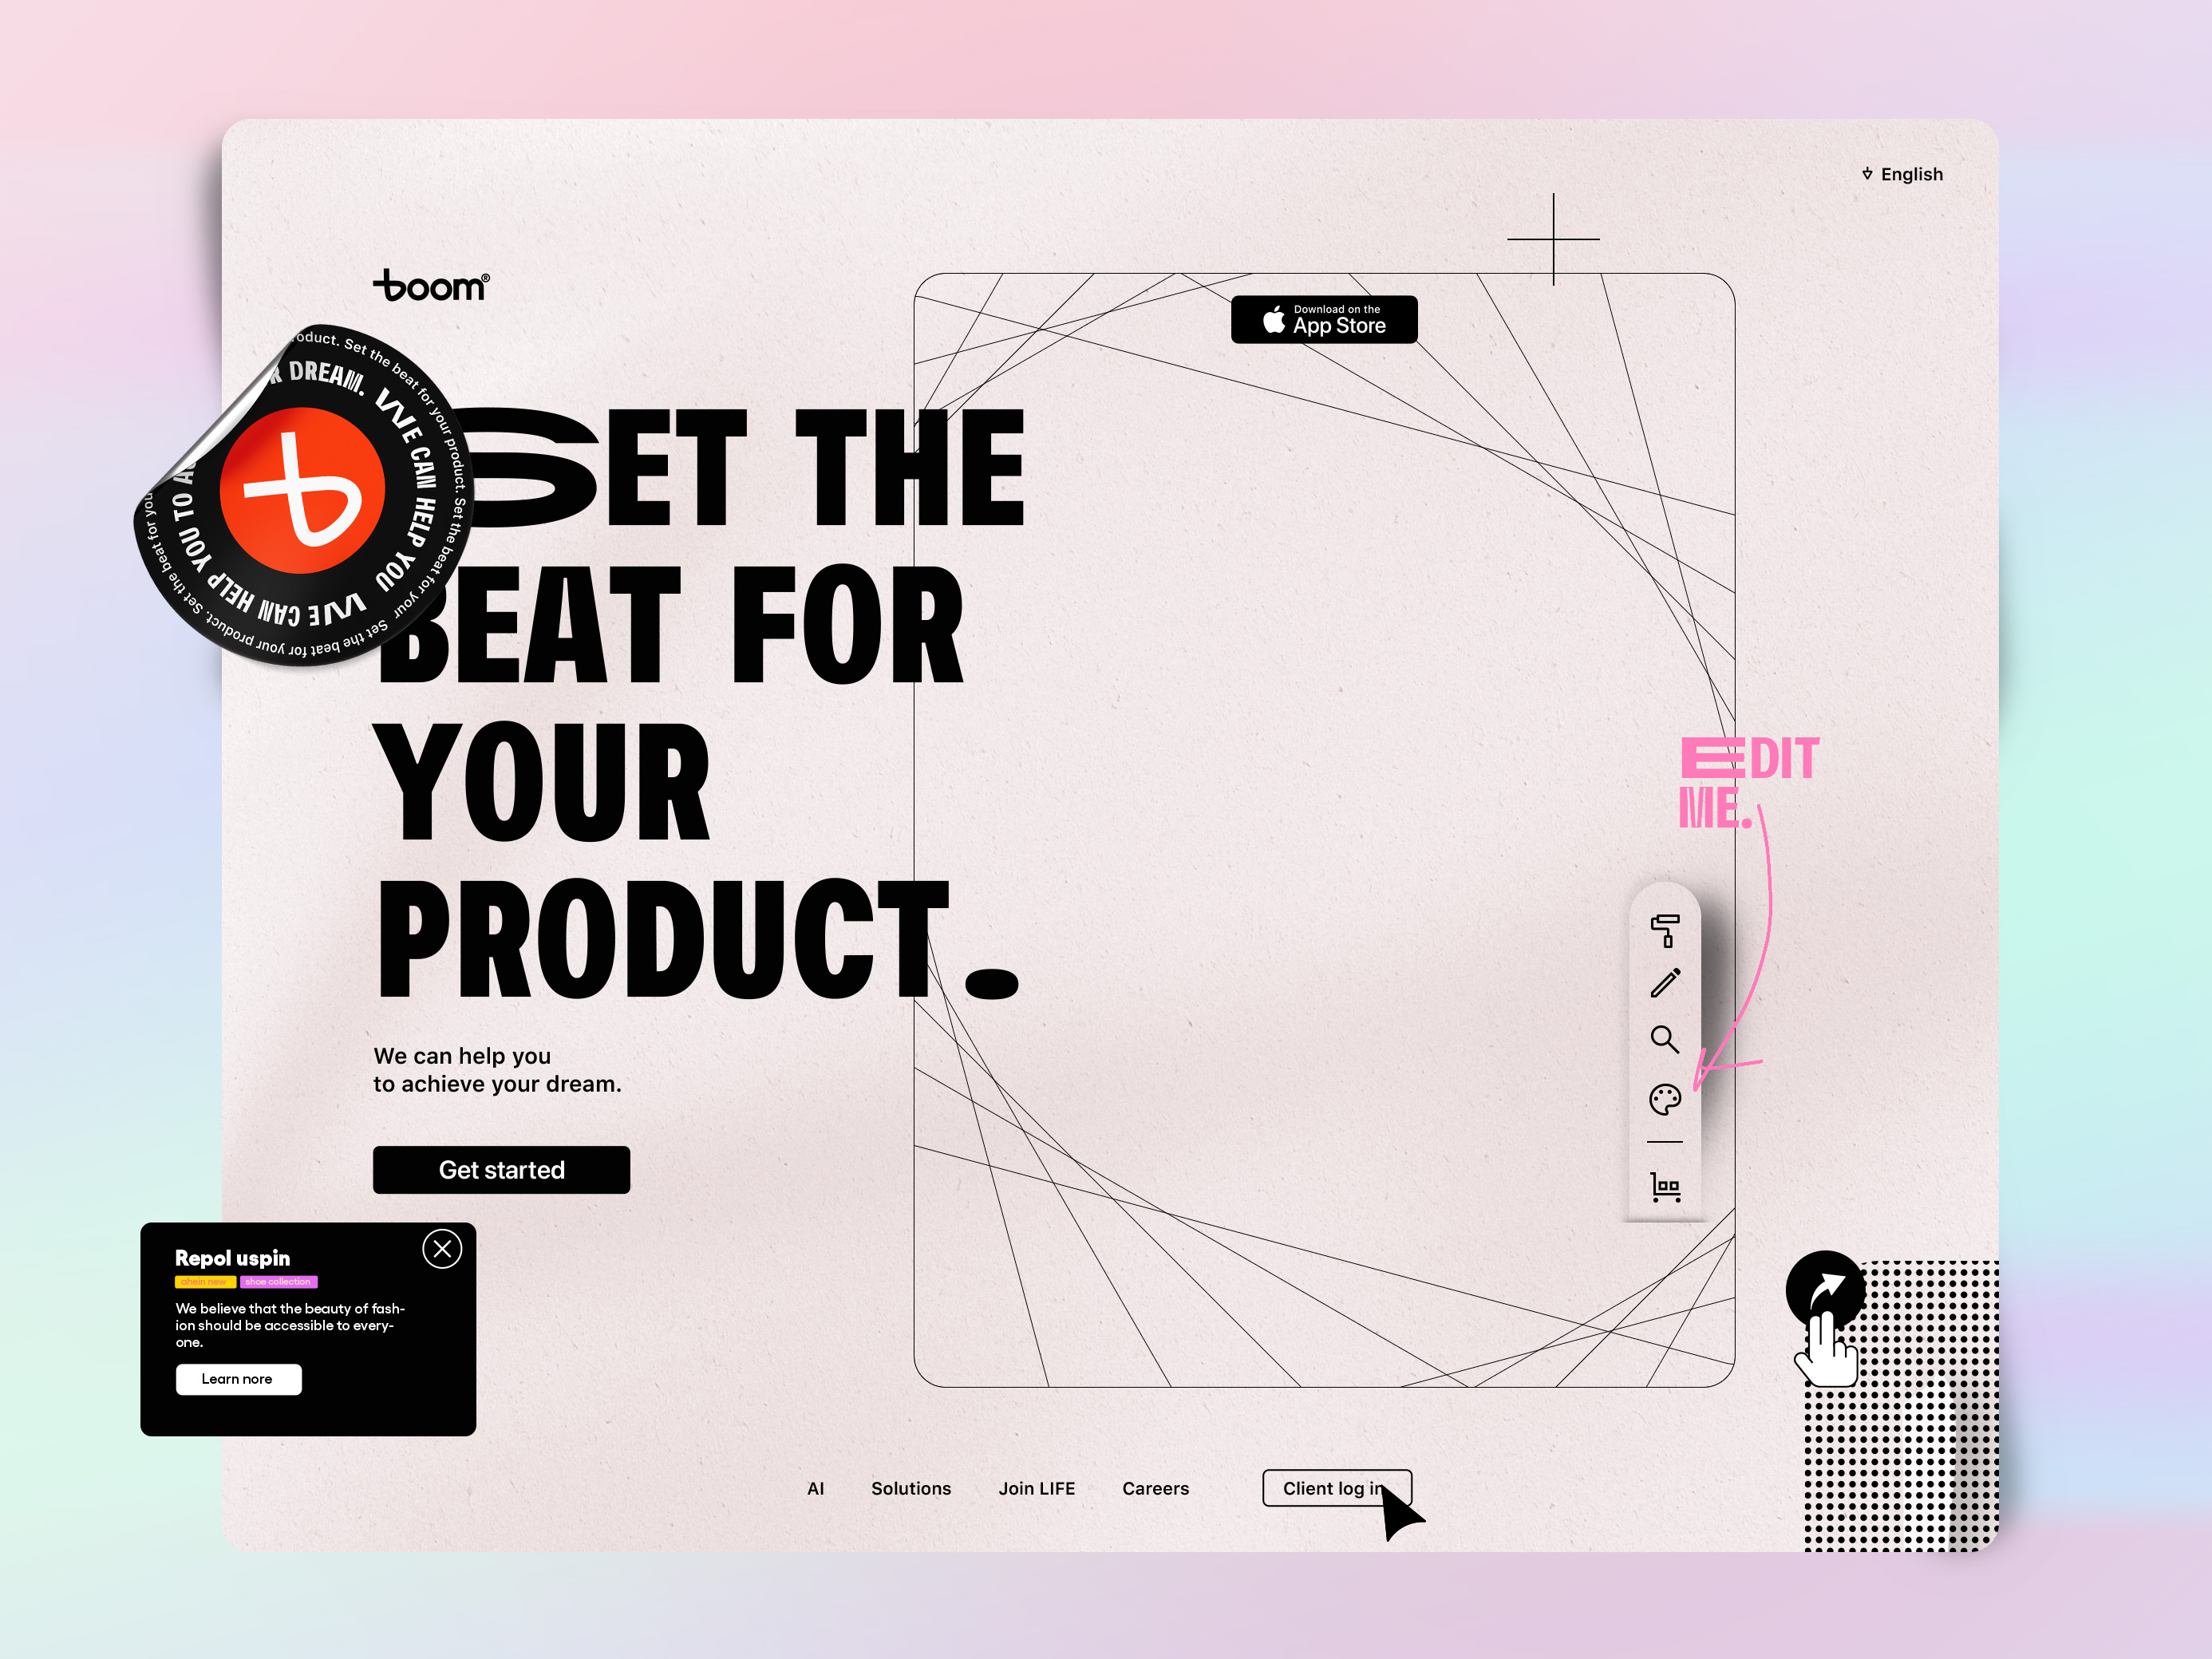 The work was performed for Boom and showcase some of the new identity elements and patterns that form a design system.